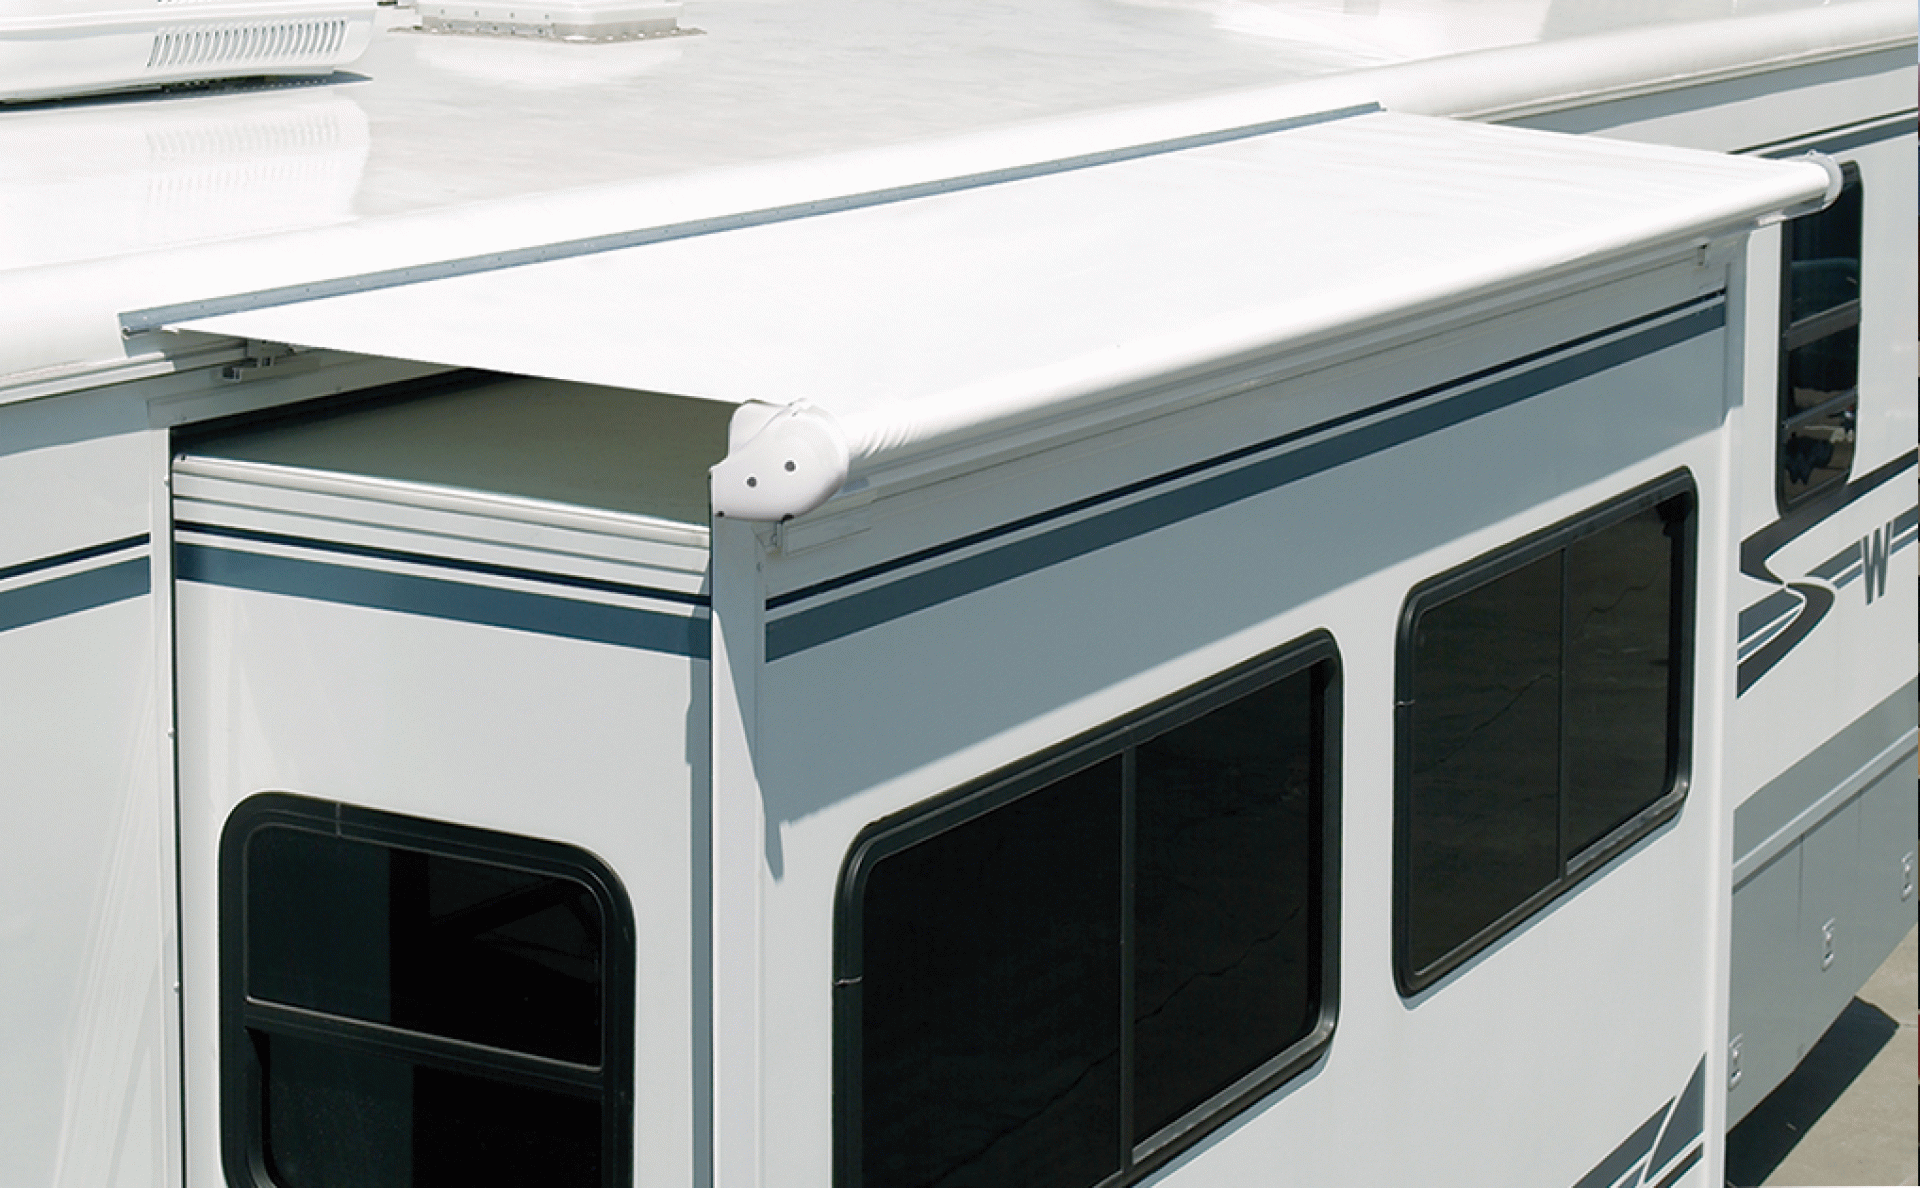 CAREFREE OF COLORADO | UQ1290025 | SIDEOUT KOVER III AWNING 126" - 129" ROOF RANGE WHITE VINYL FABRIC & DEFLECTOR